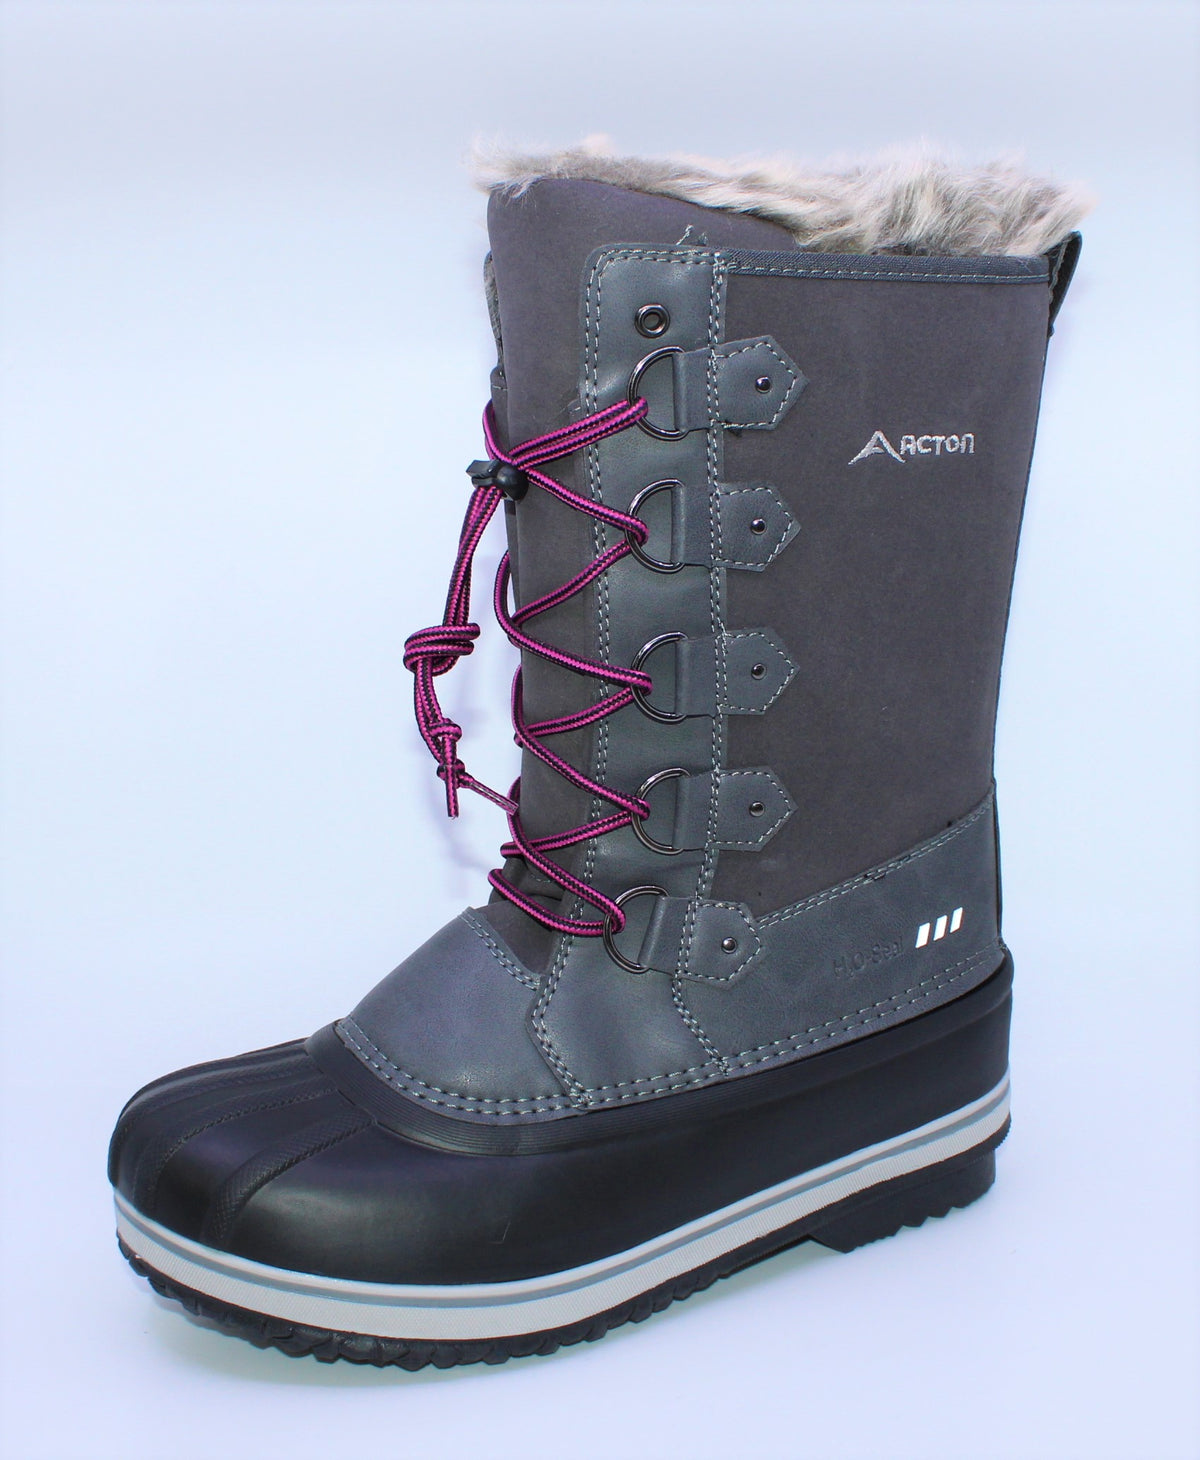 Bottes d'hiver Acton Cortina F Fille